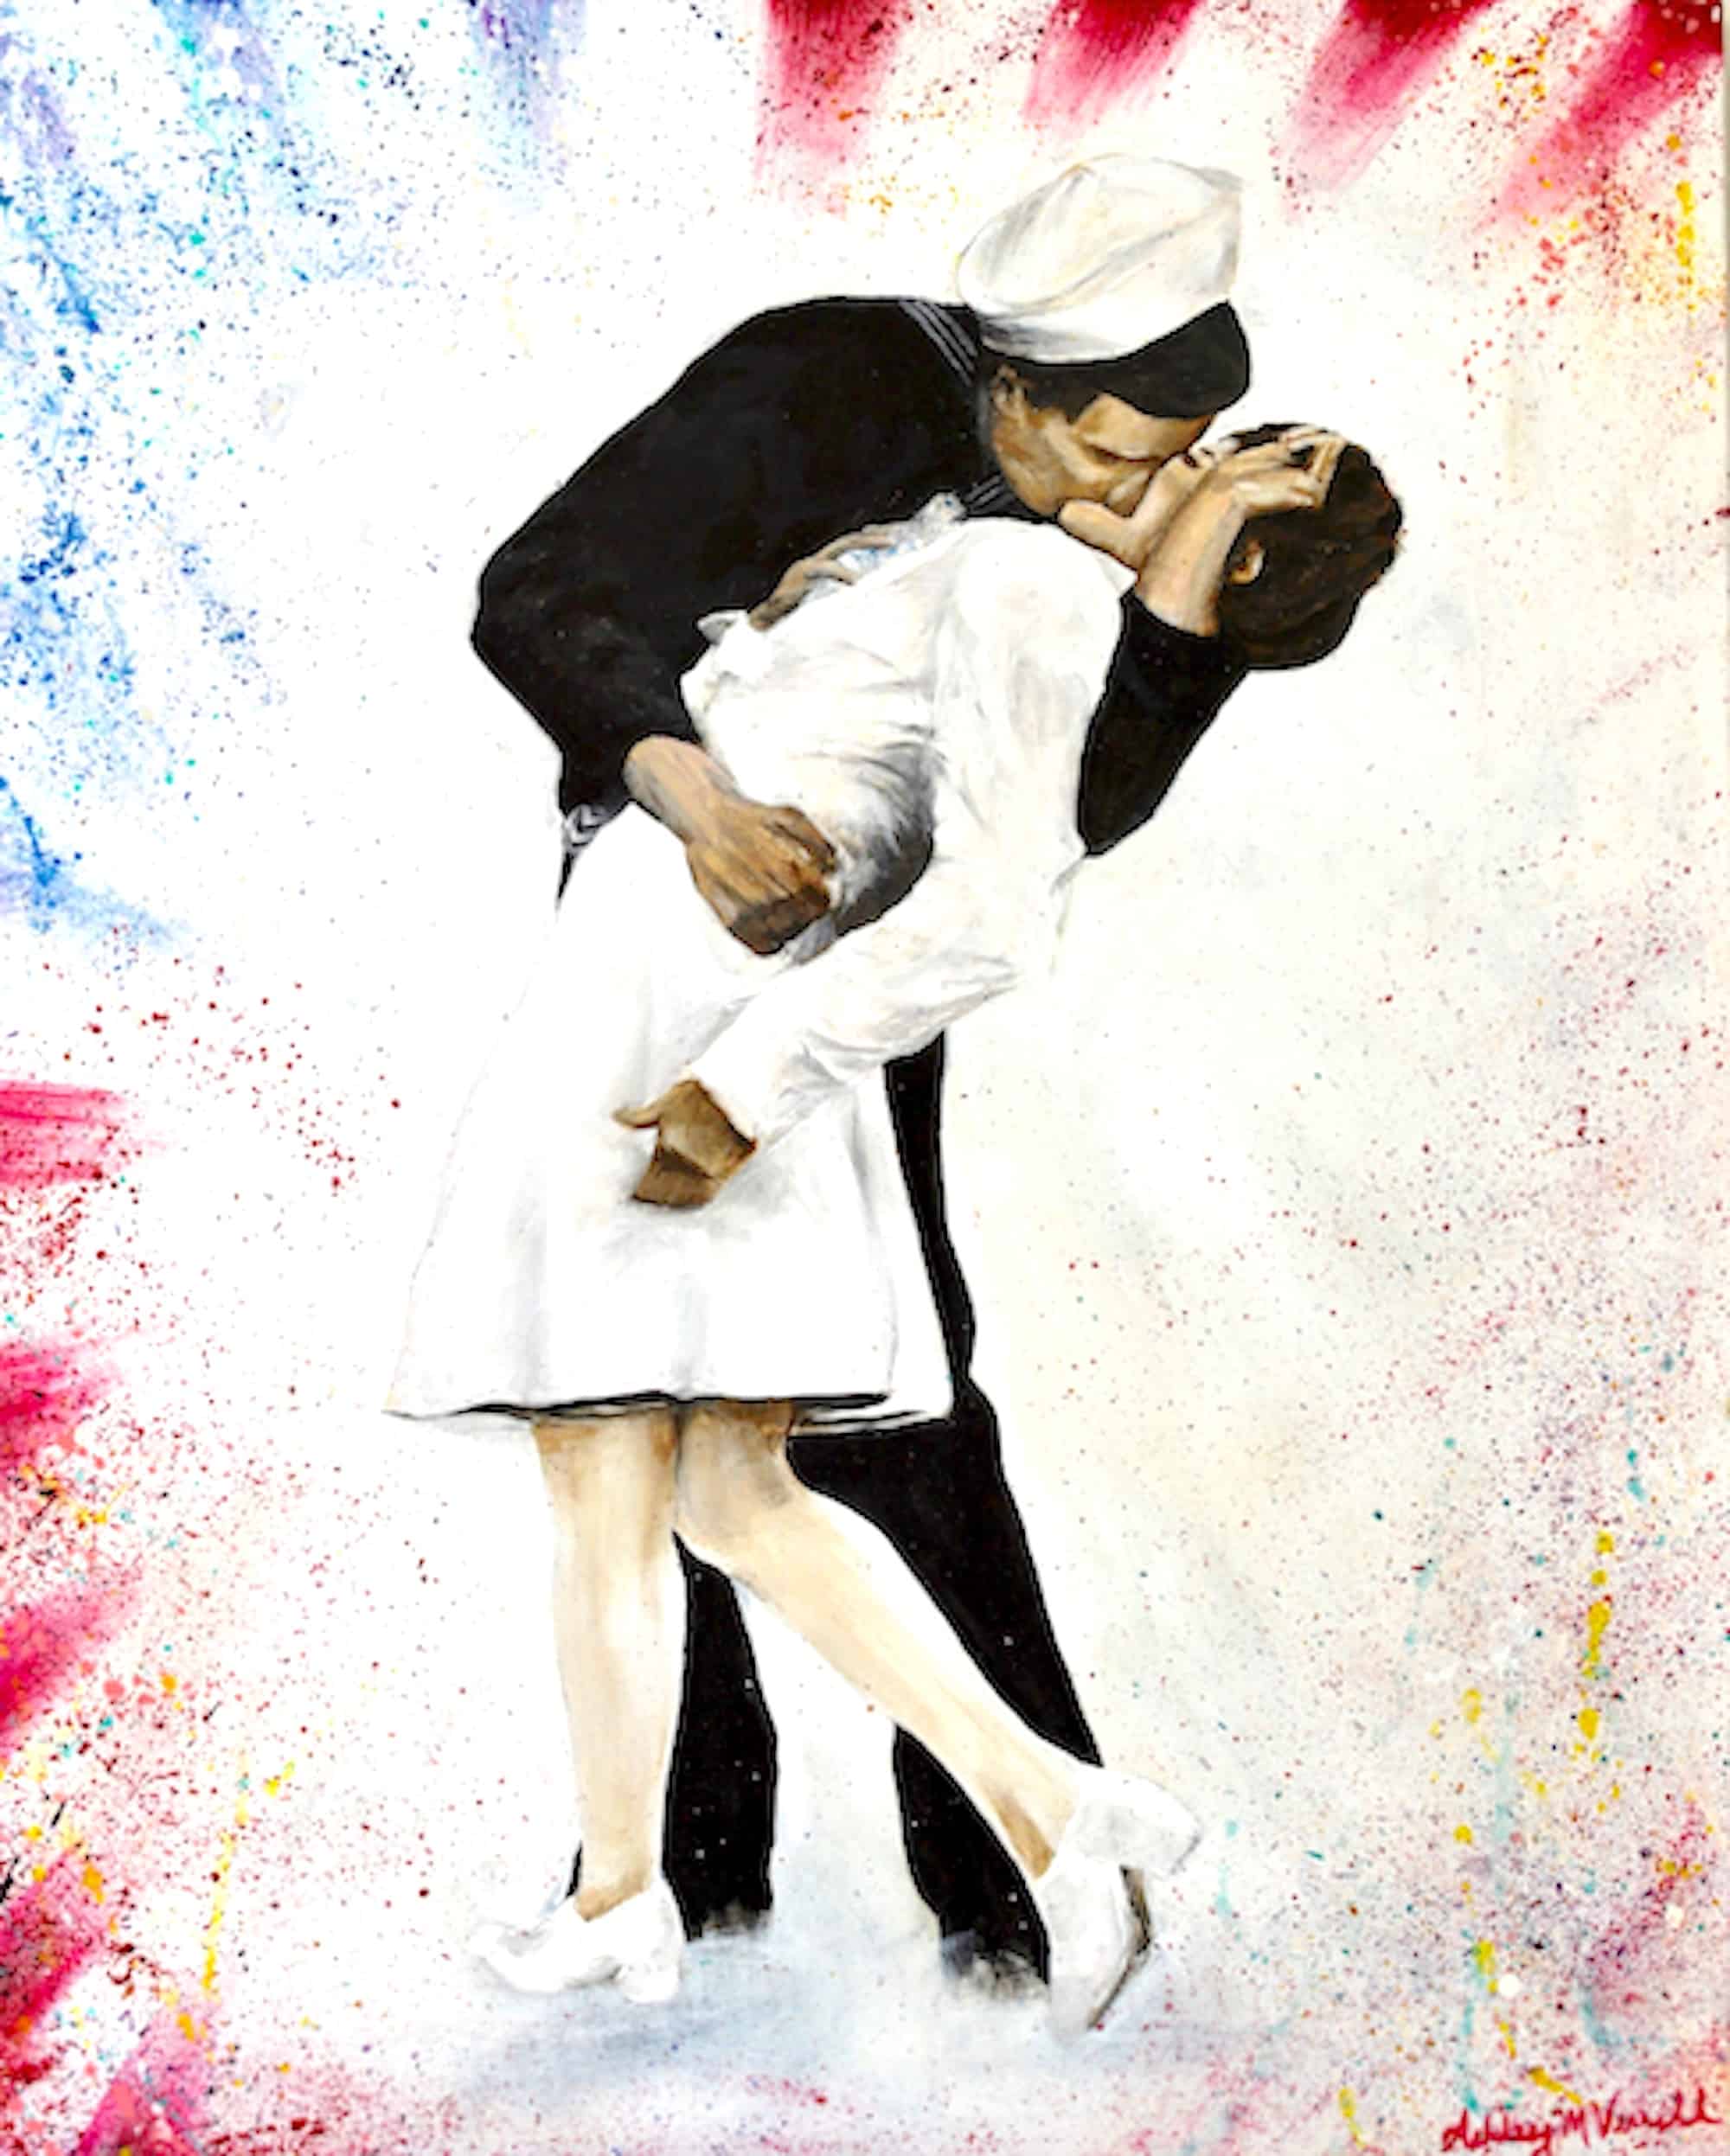 Painting of Iconic Scene of Sailor Kissing Nurse 